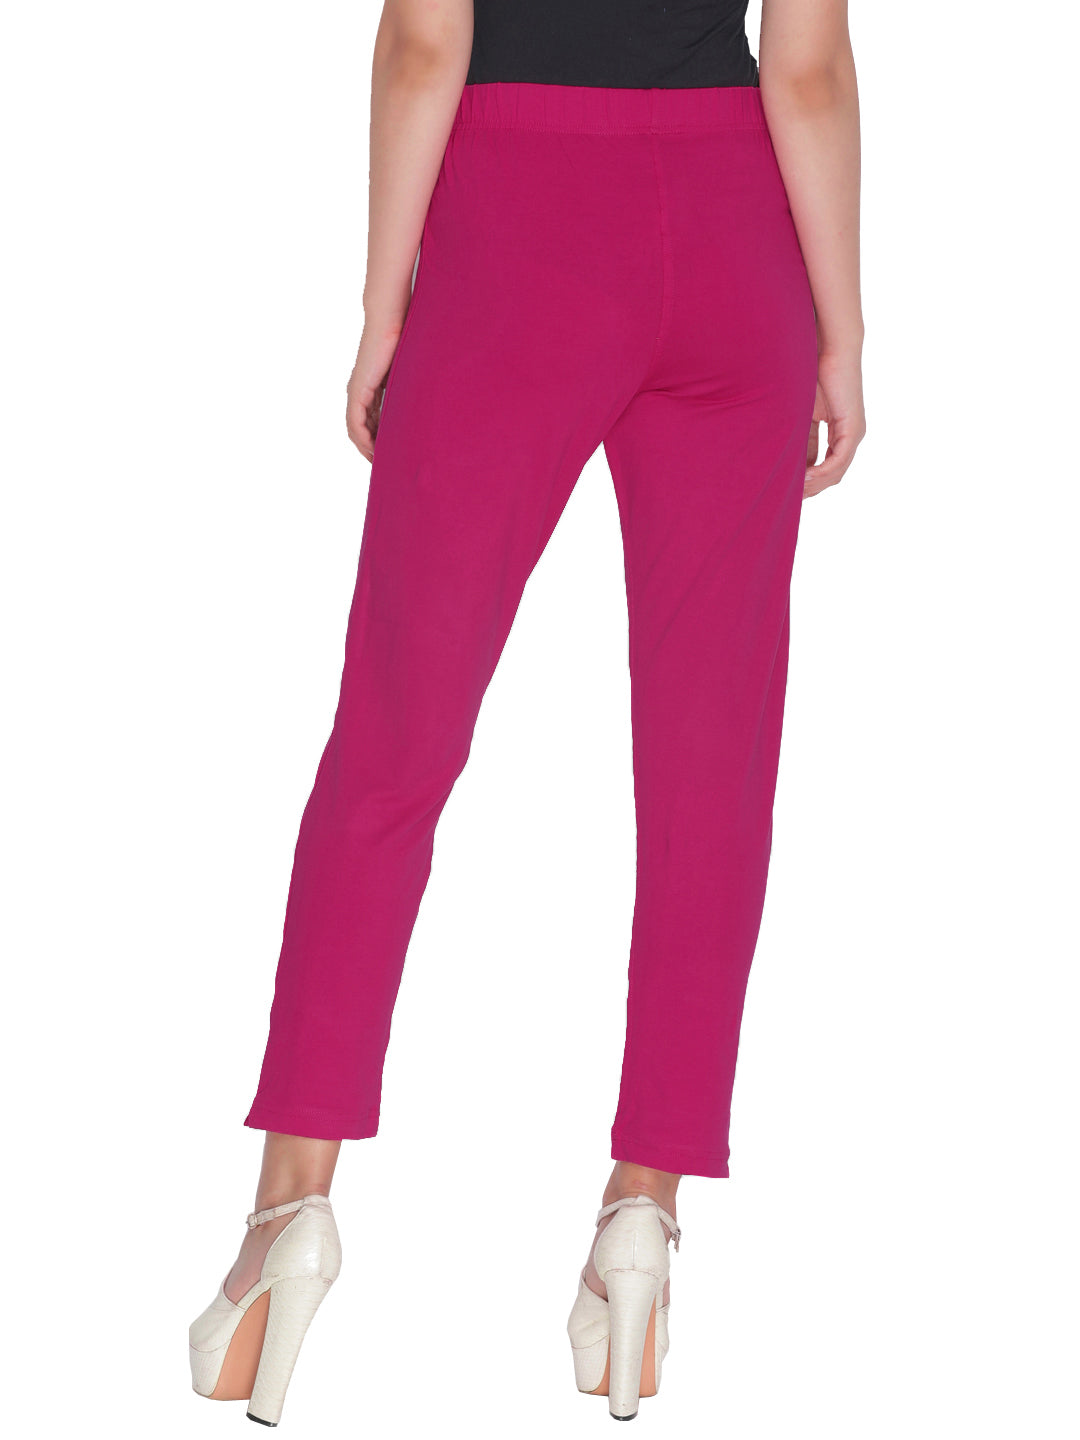 Buy NOT SO PINK Pink Solid Regular Fit Poly Blend Women's Casual Wear Pants  | Shoppers Stop